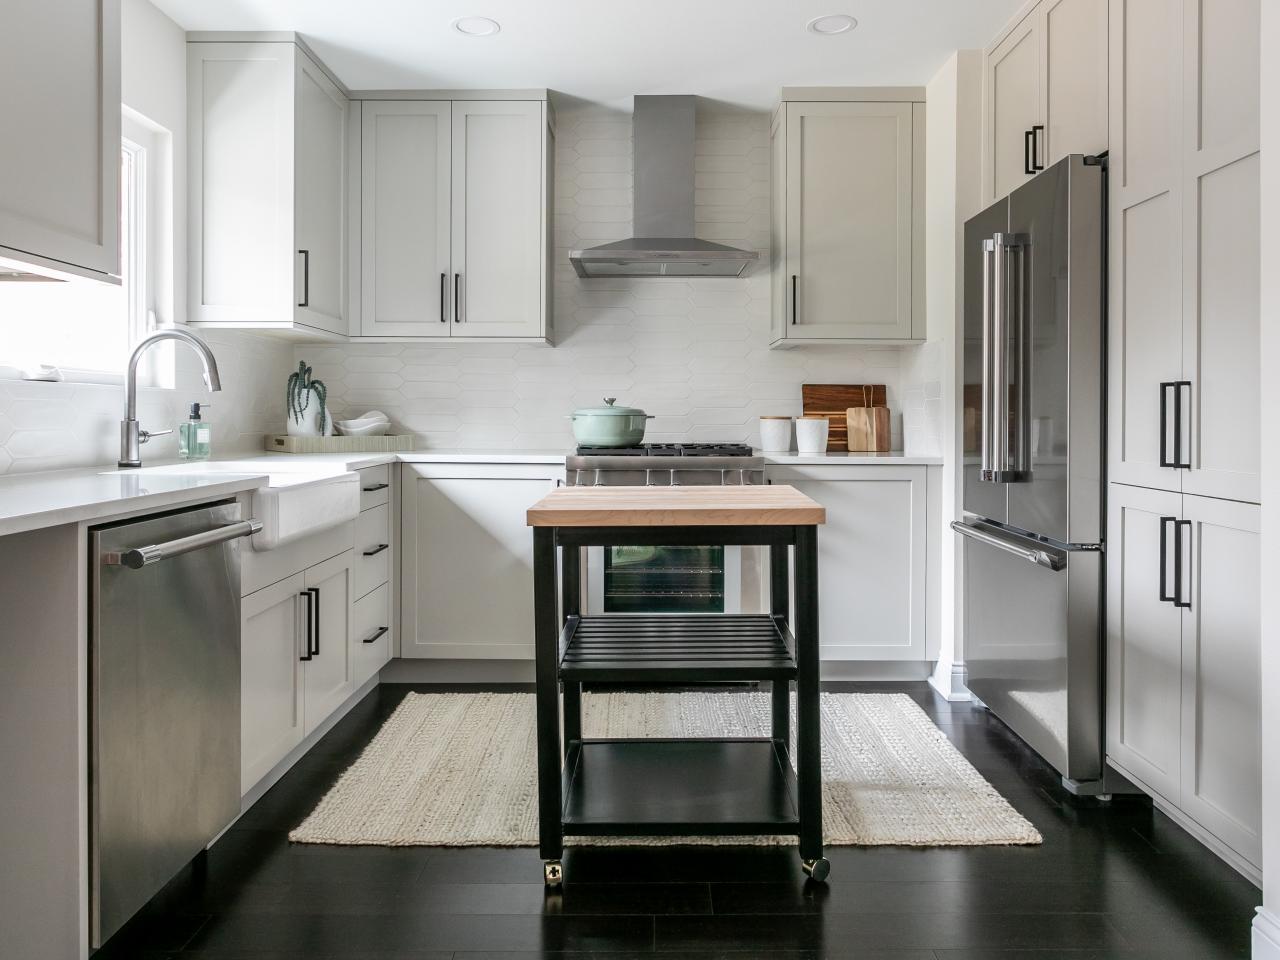 When Small is Smart: How to Make a Compact Kitchen Beautiful and Functional